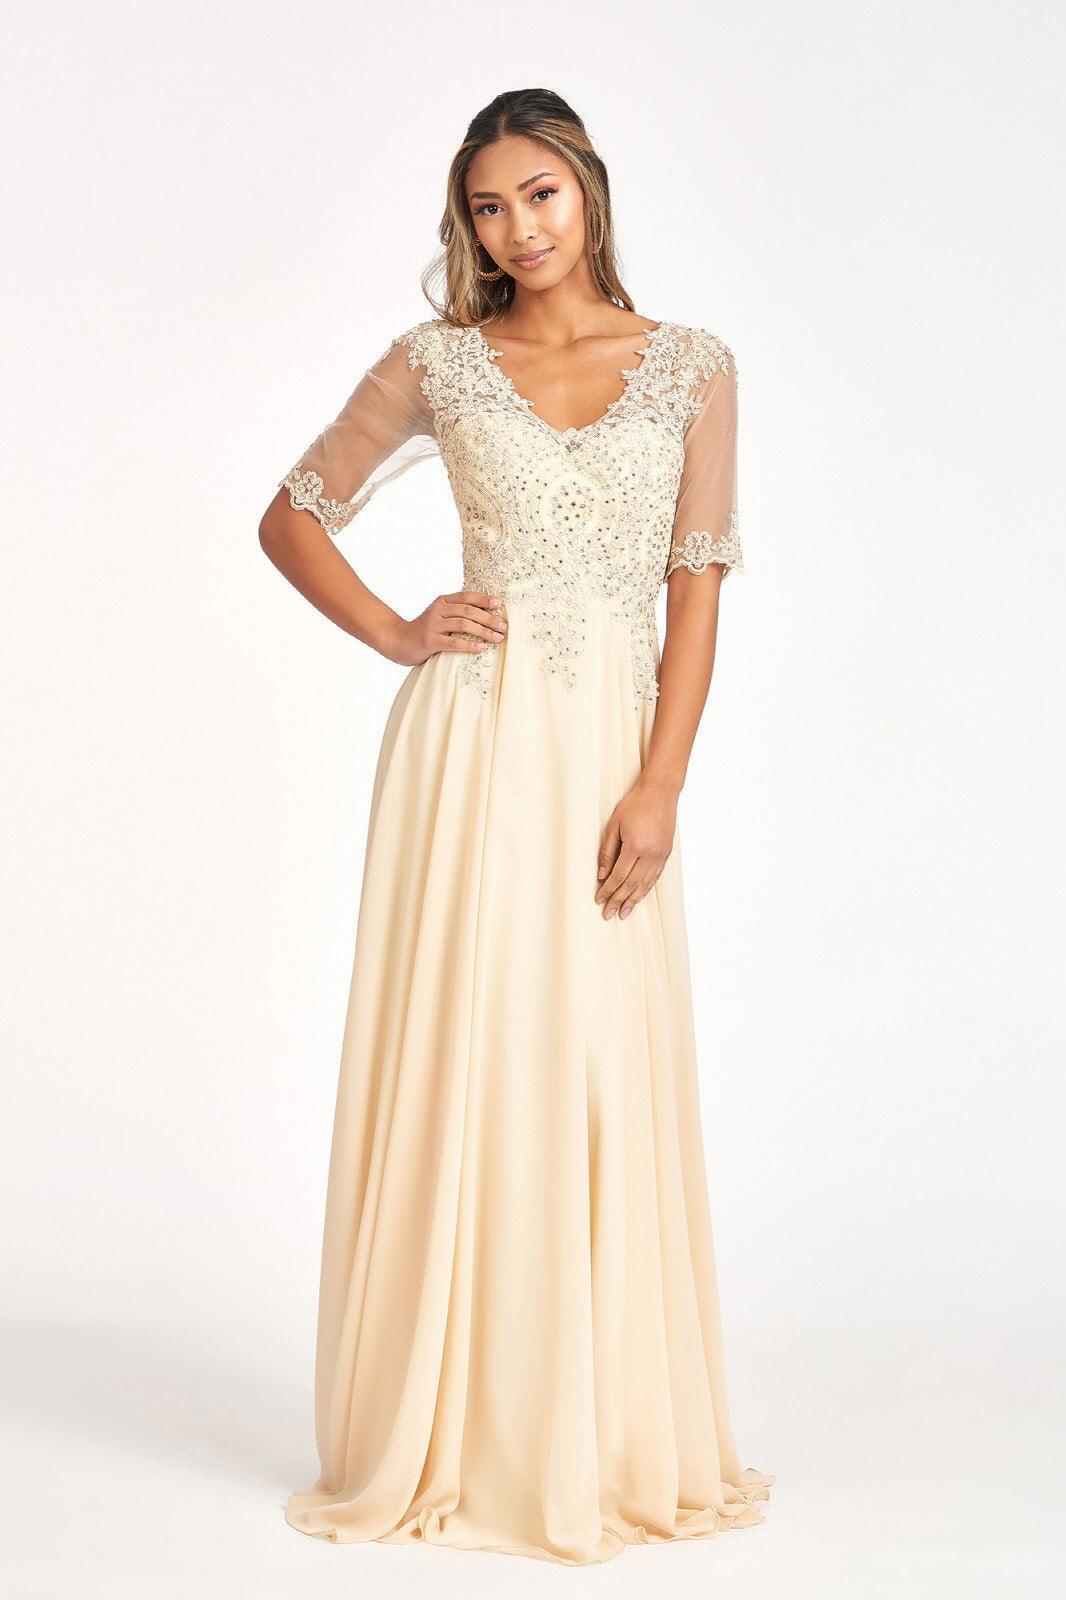 Formal Long Mother of the Bride Dress Sale - The Dress Outlet